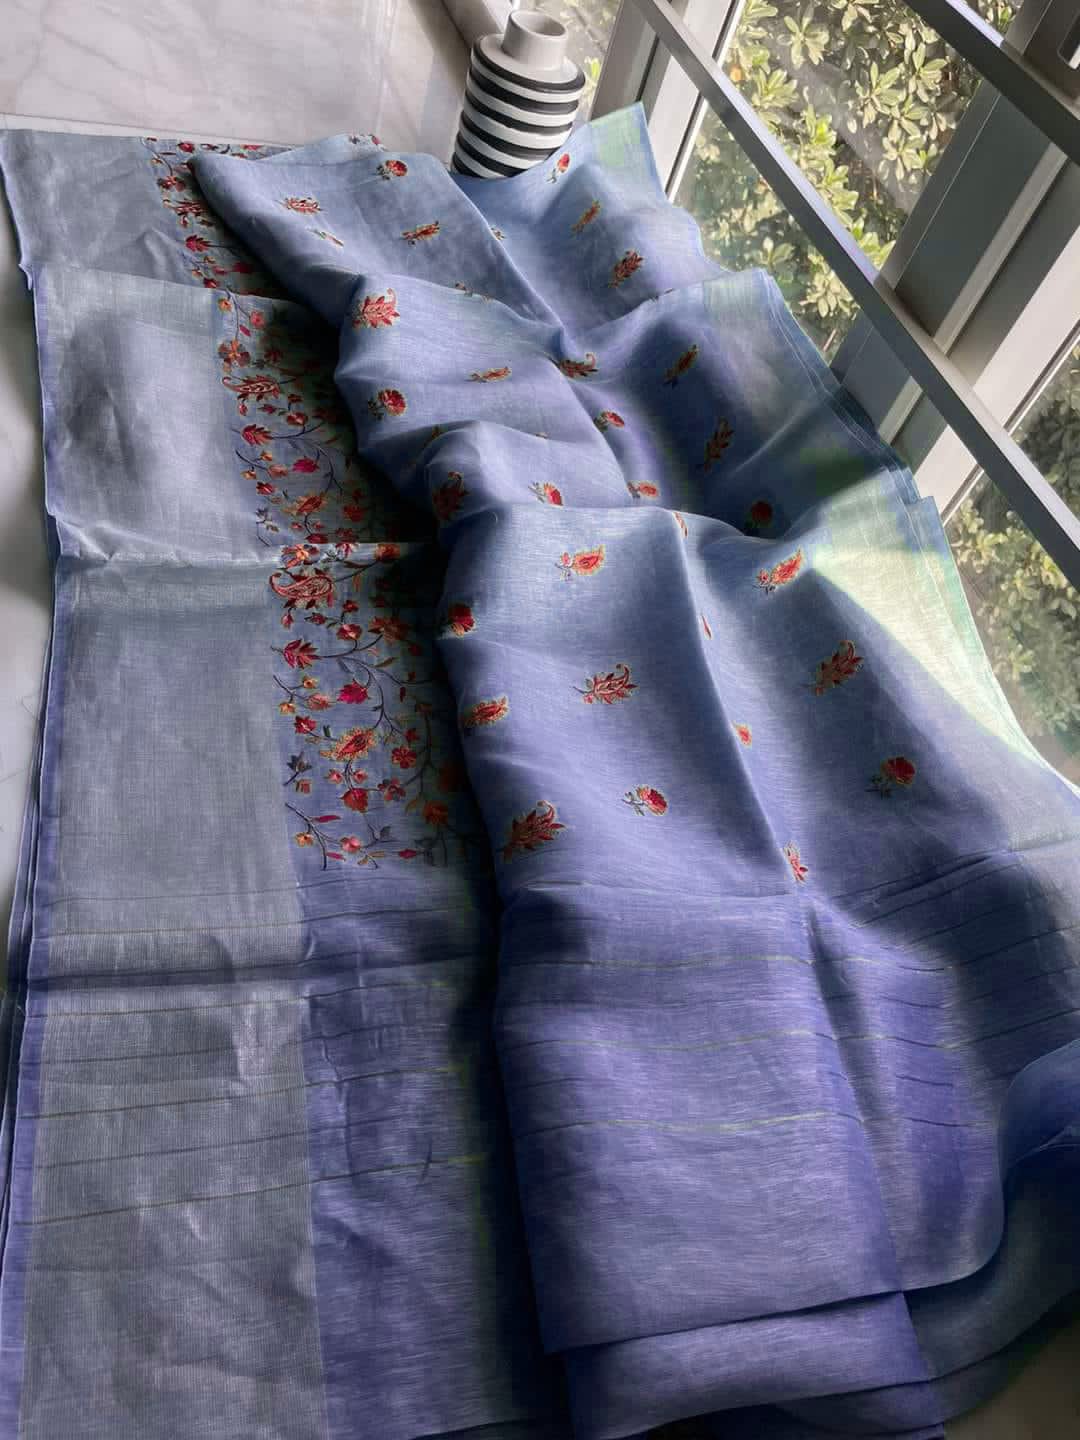 Pure Handwoven Silk By Linen Saree With Embroidery Work.